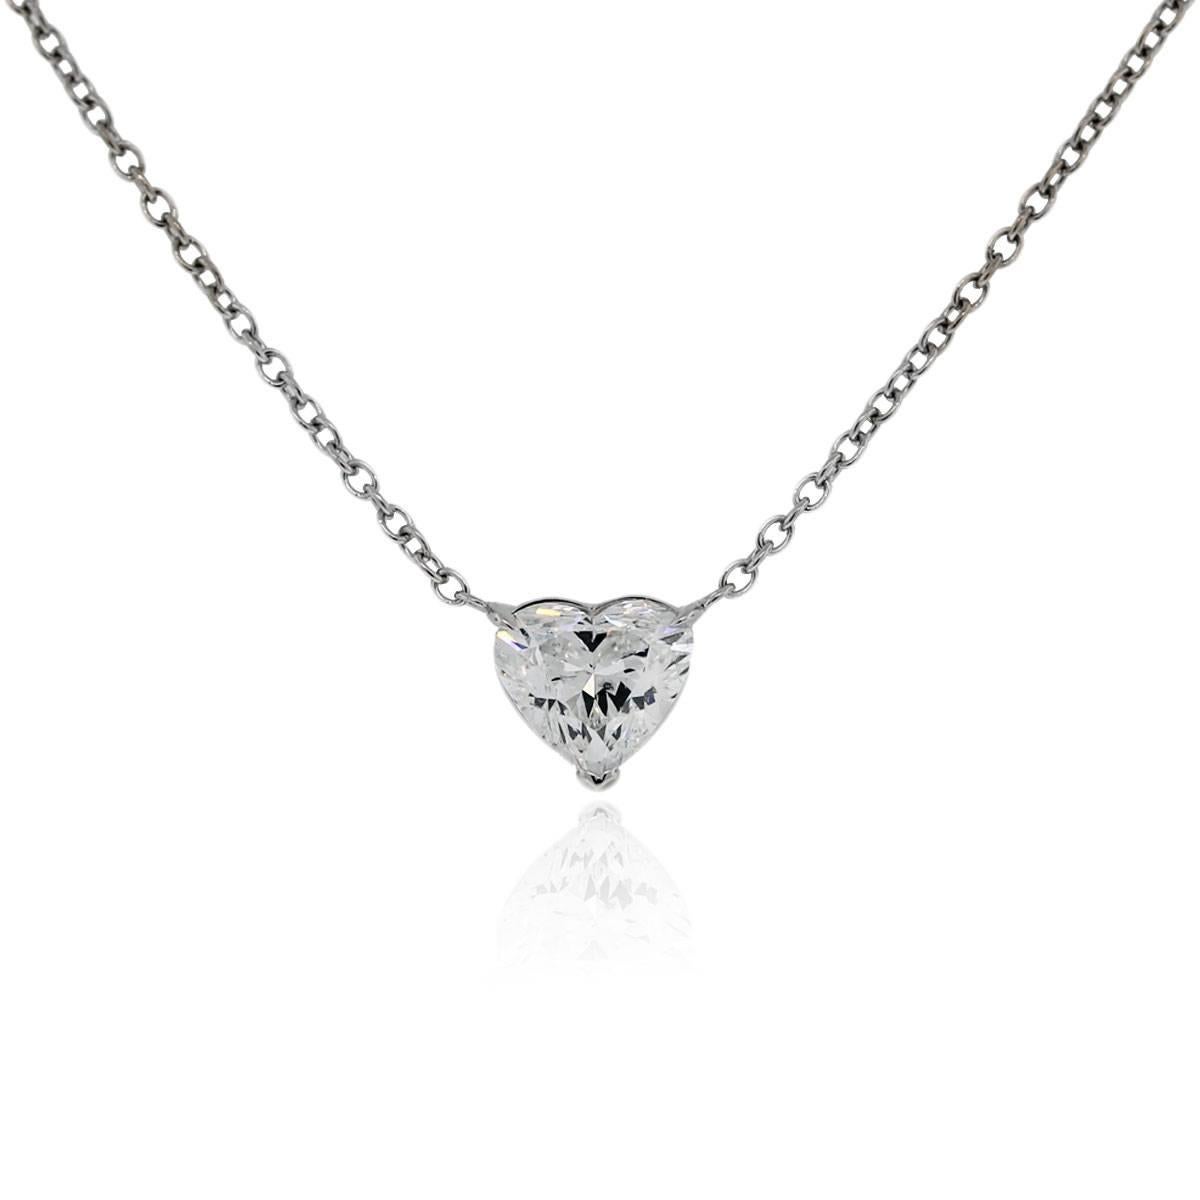 14k White Gold 2.05ct GIA Cert. Heart Brilliant Diamond Pendant Necklace
Material: 14k White Gold
Diamond Details: 2.05ct Heart Brilliant GIA Certified Diamond. Diamond is F in color and SI2 in clarity.
Measurements: 7.71 x 8.78 x 5.24mm
Total